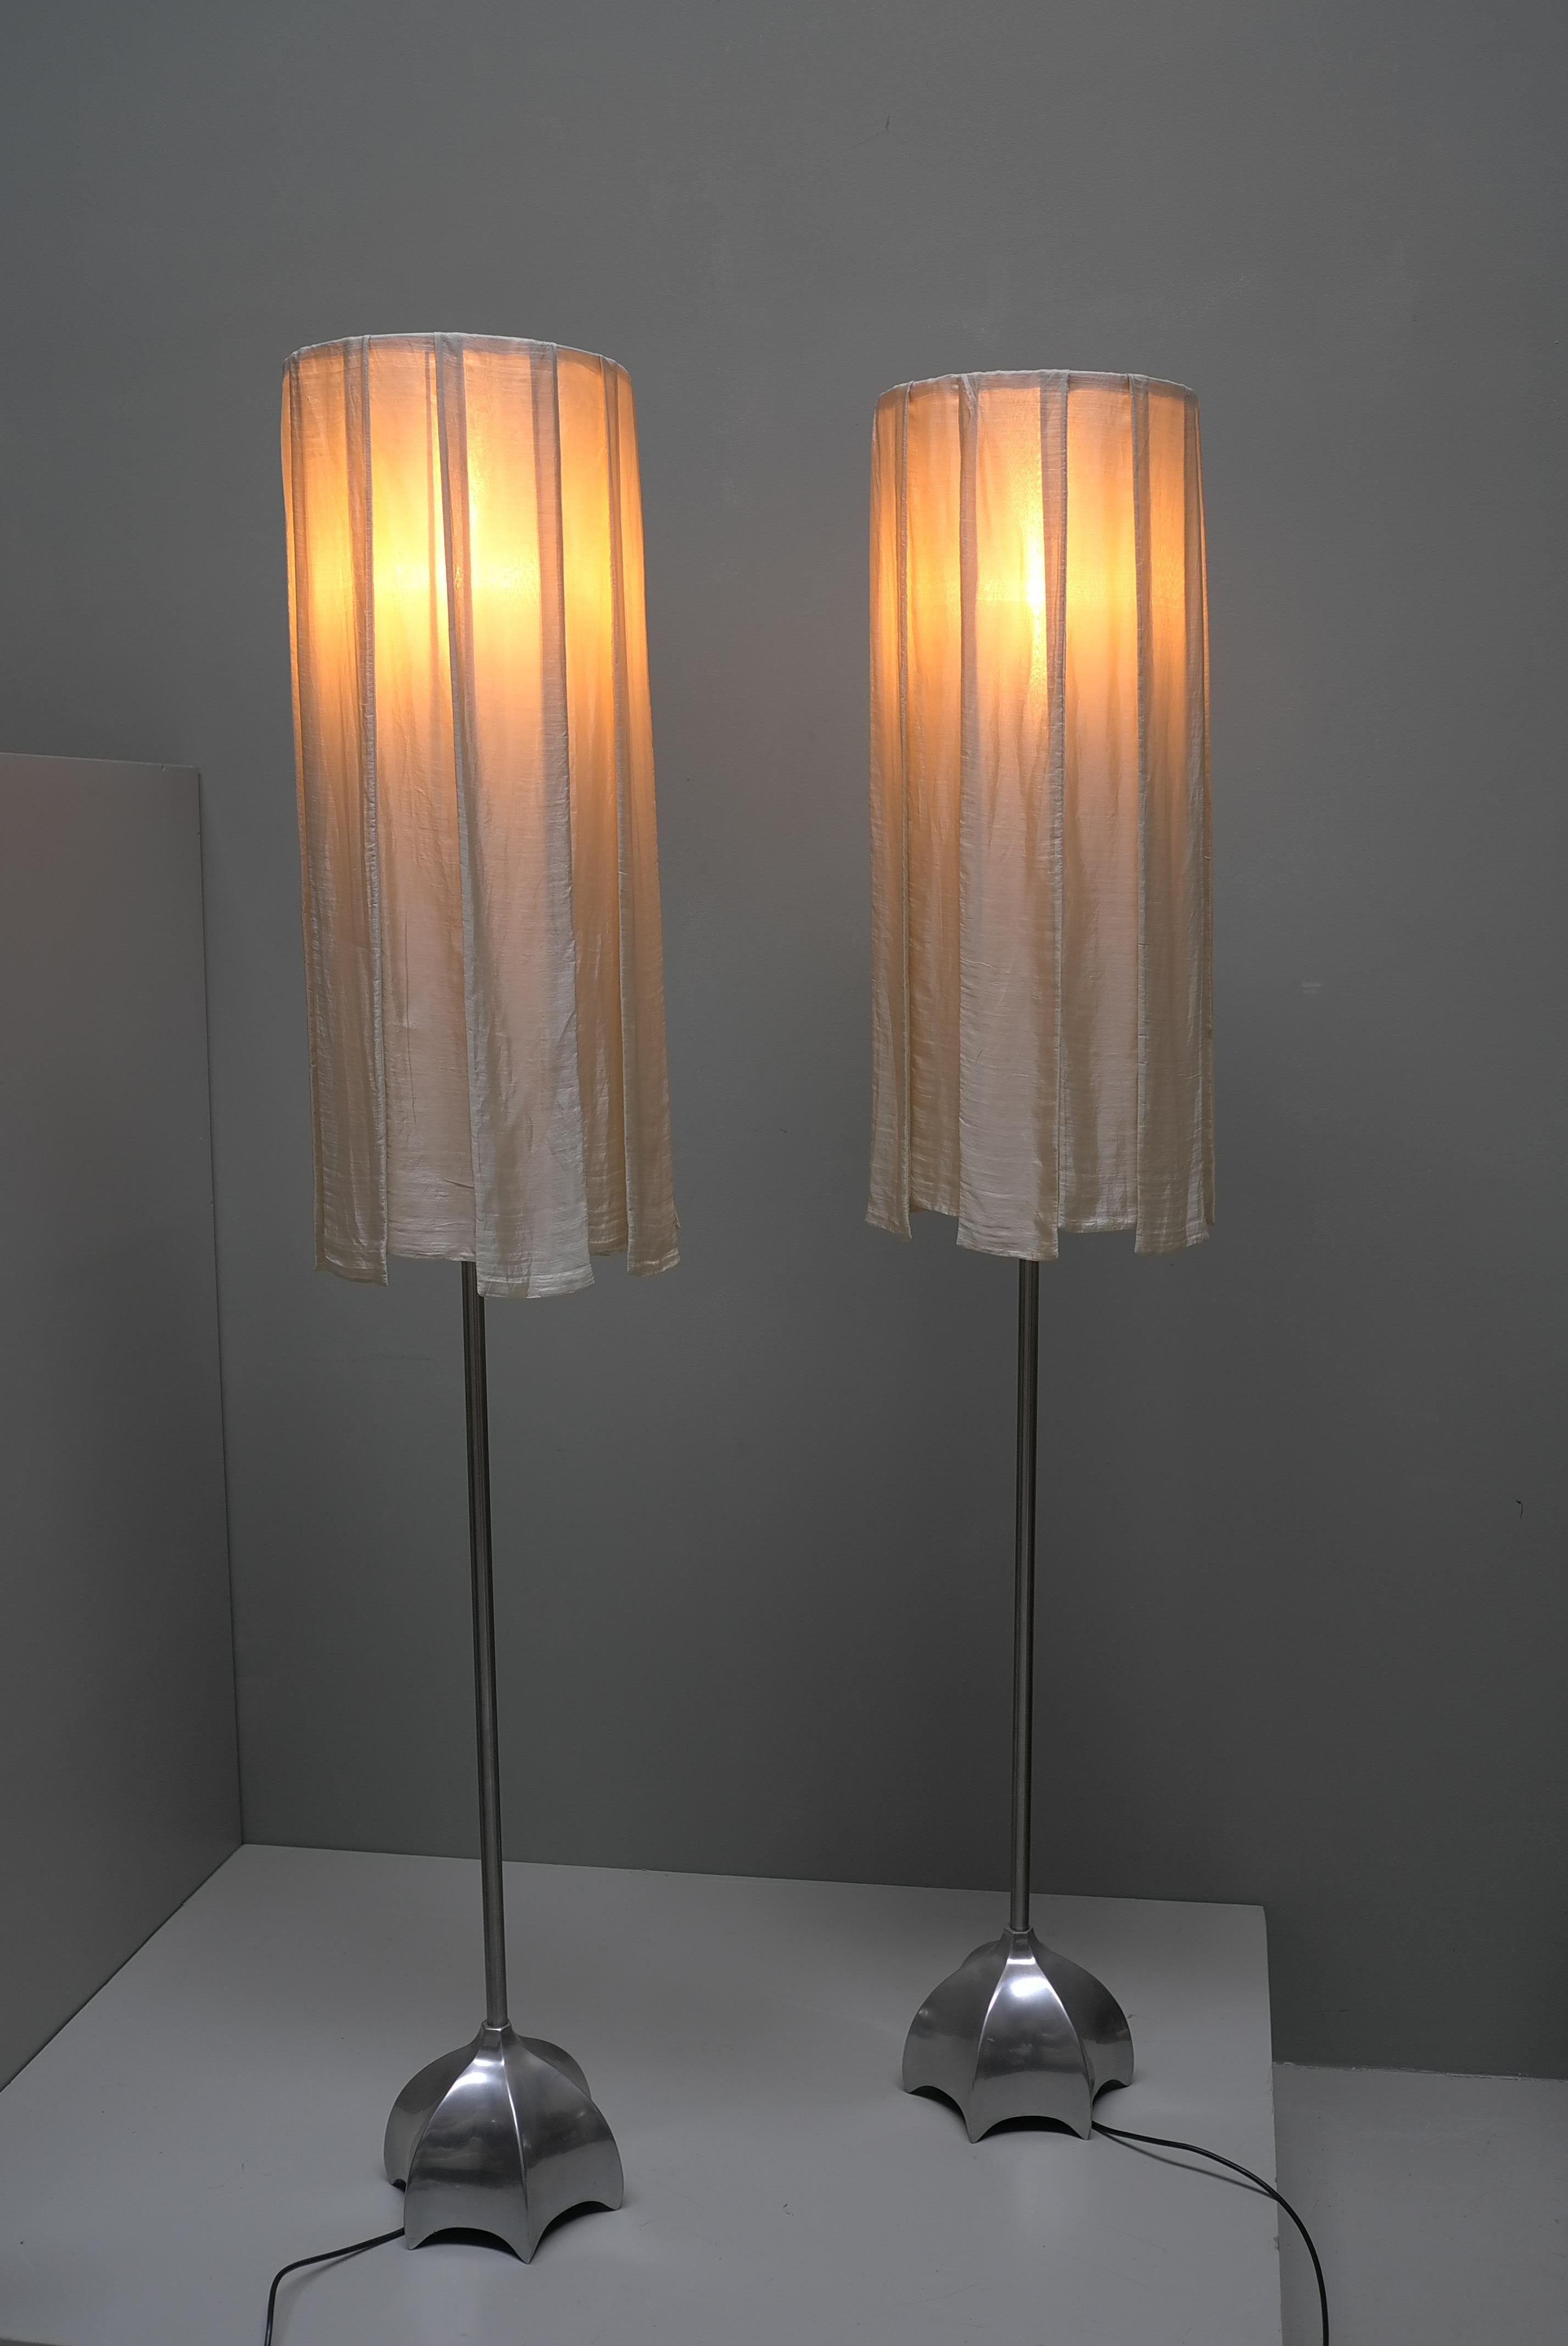 Pair of Sculptural Floor Lamps in Brass with off white Silk Curtain shades circa 1980's. The lamps are dimmable.

